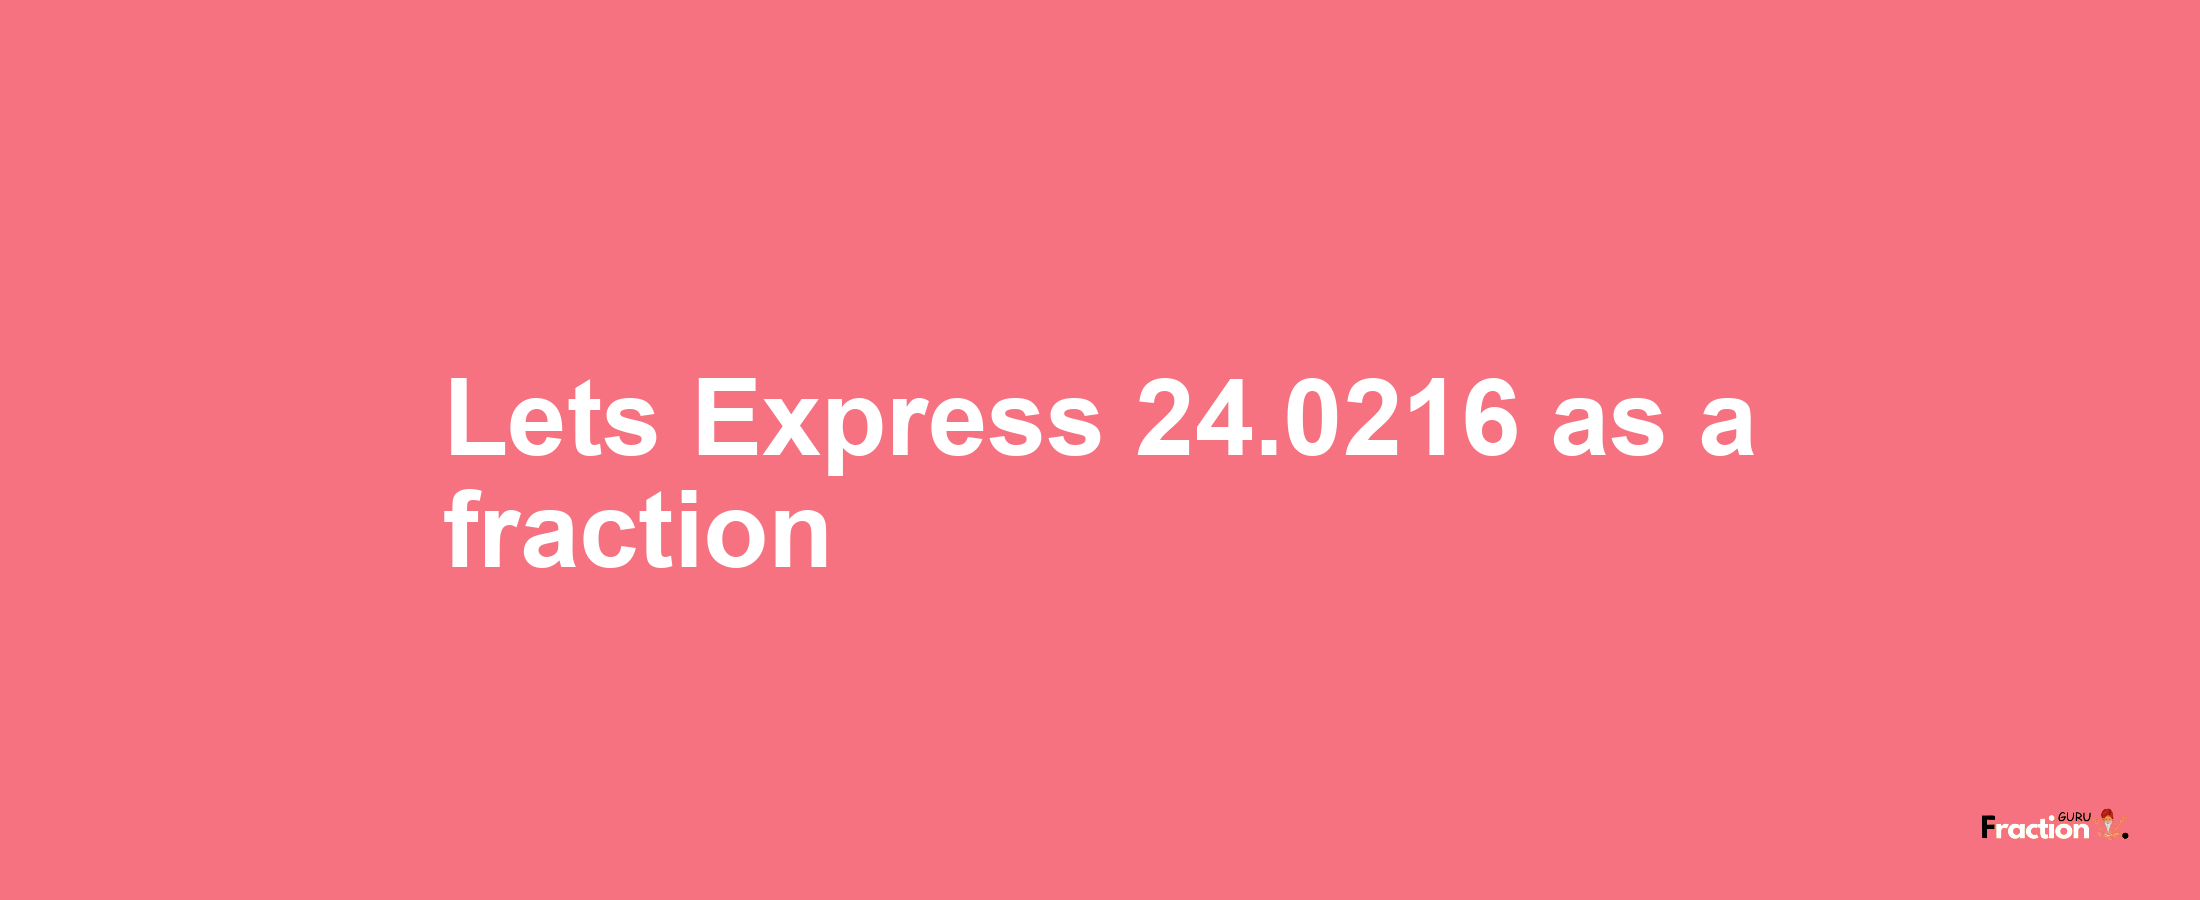 Lets Express 24.0216 as afraction